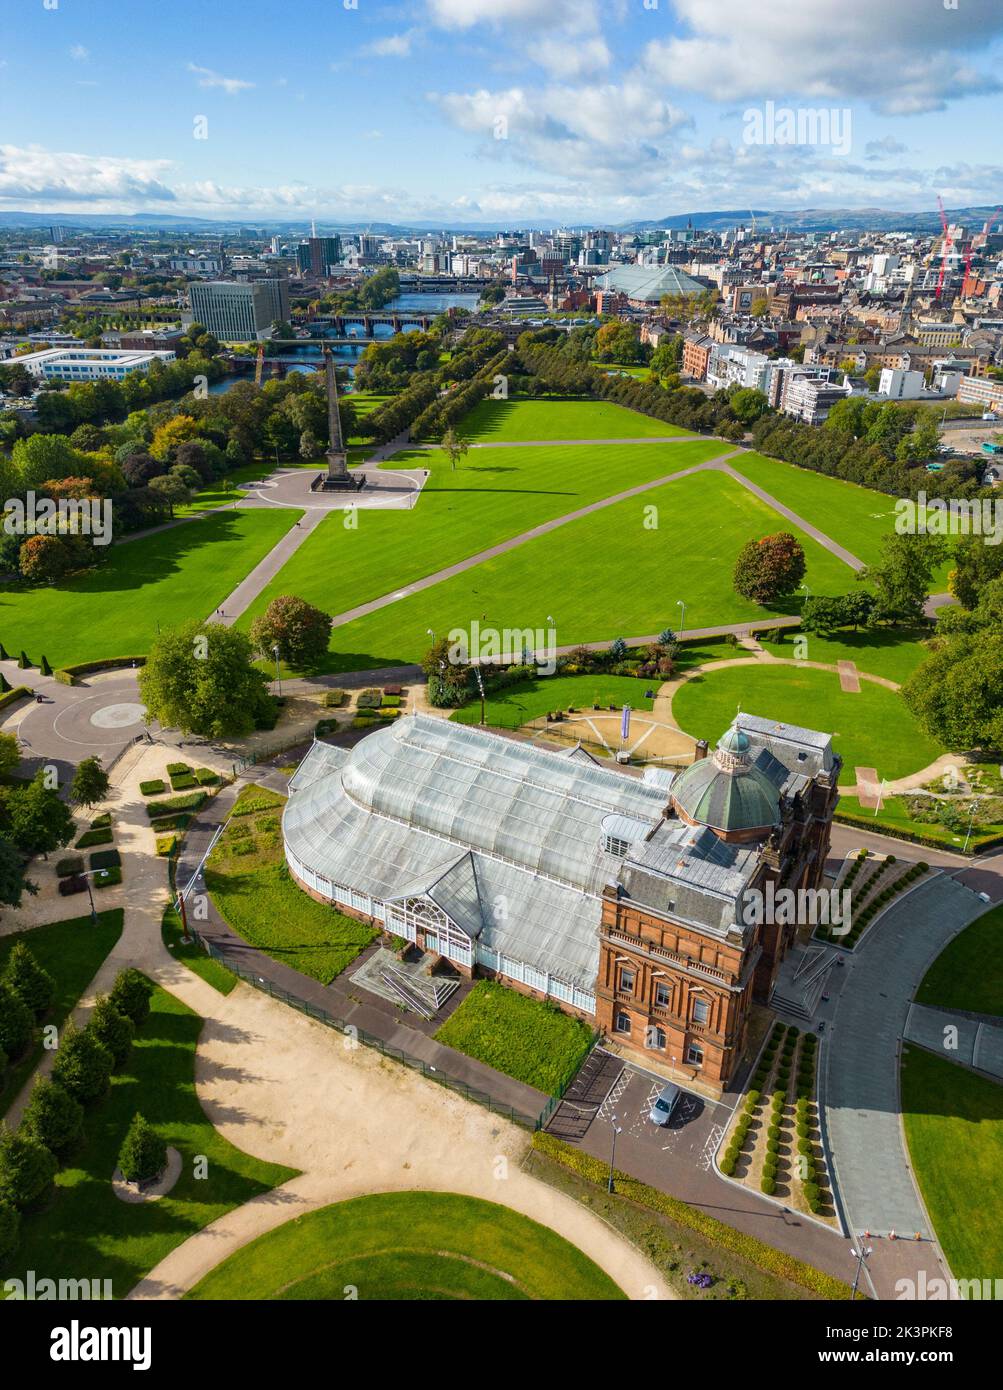 Aerial view of Peoples Palace and Winter Gardens on Glasgow Green park  in Glasgow, Scotland, UK Stock Photo